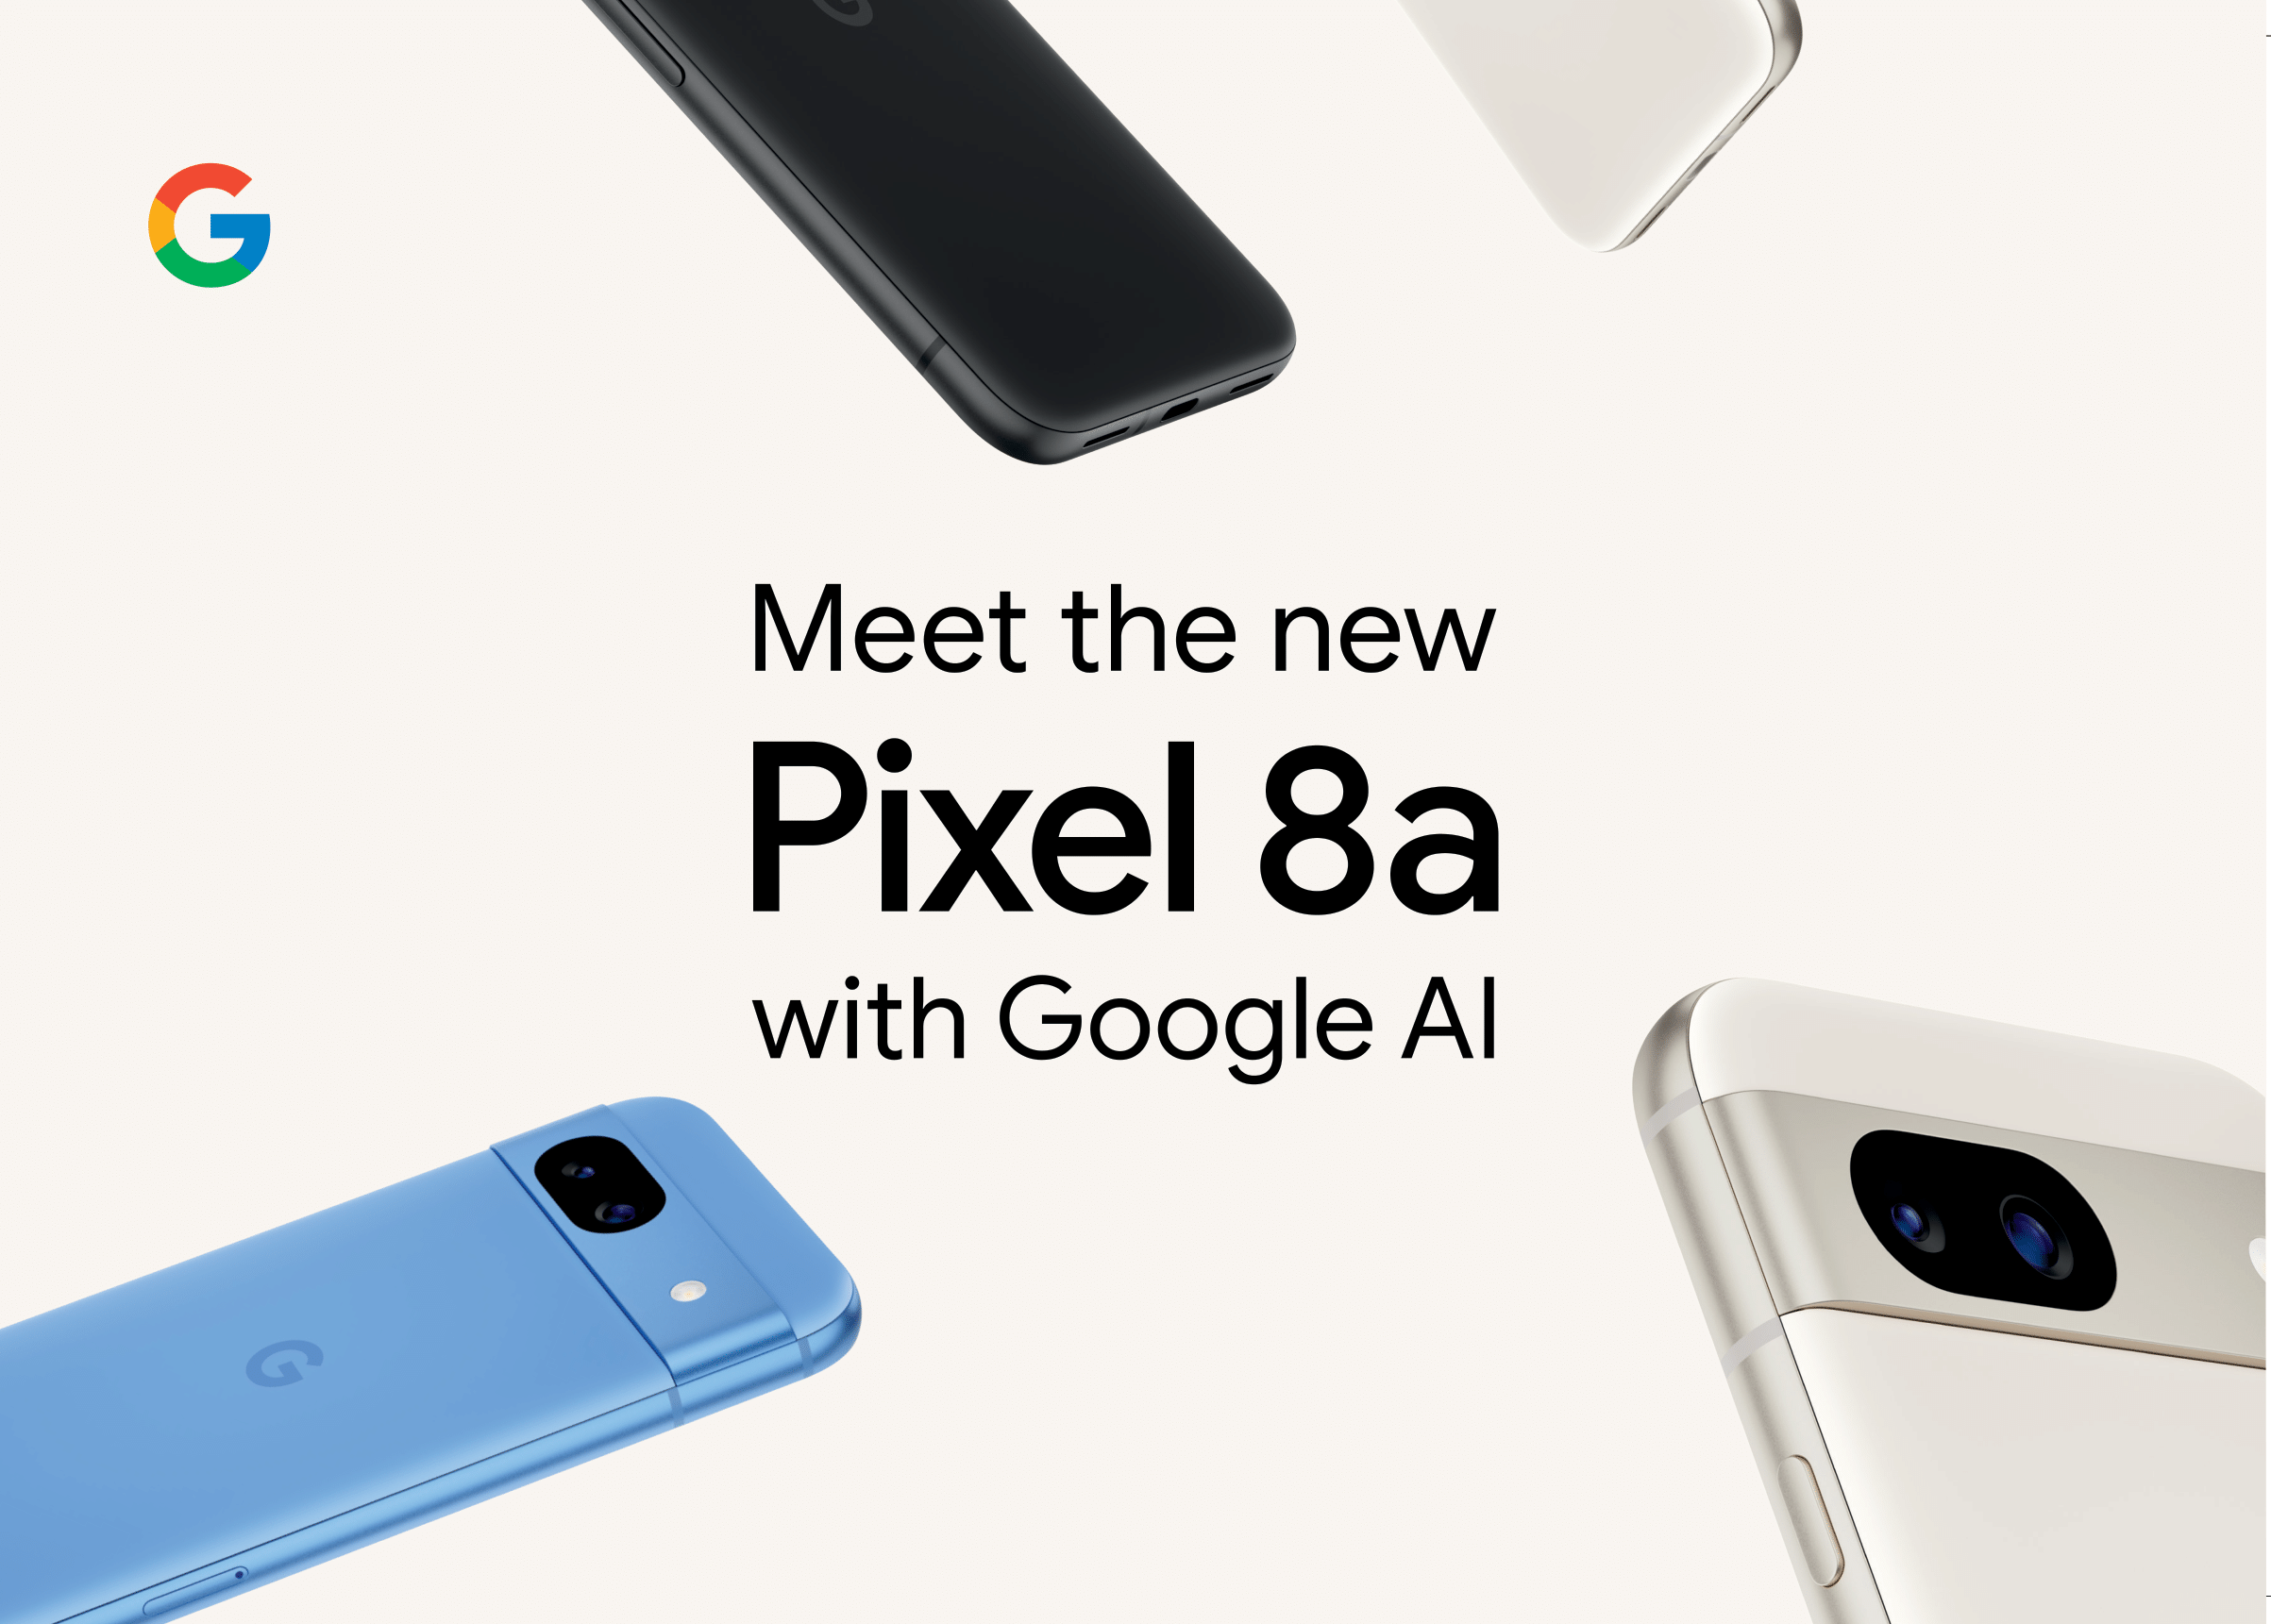 Meet the Google Pixel 8a: Affordable, Powerful Smartphone Built for Business